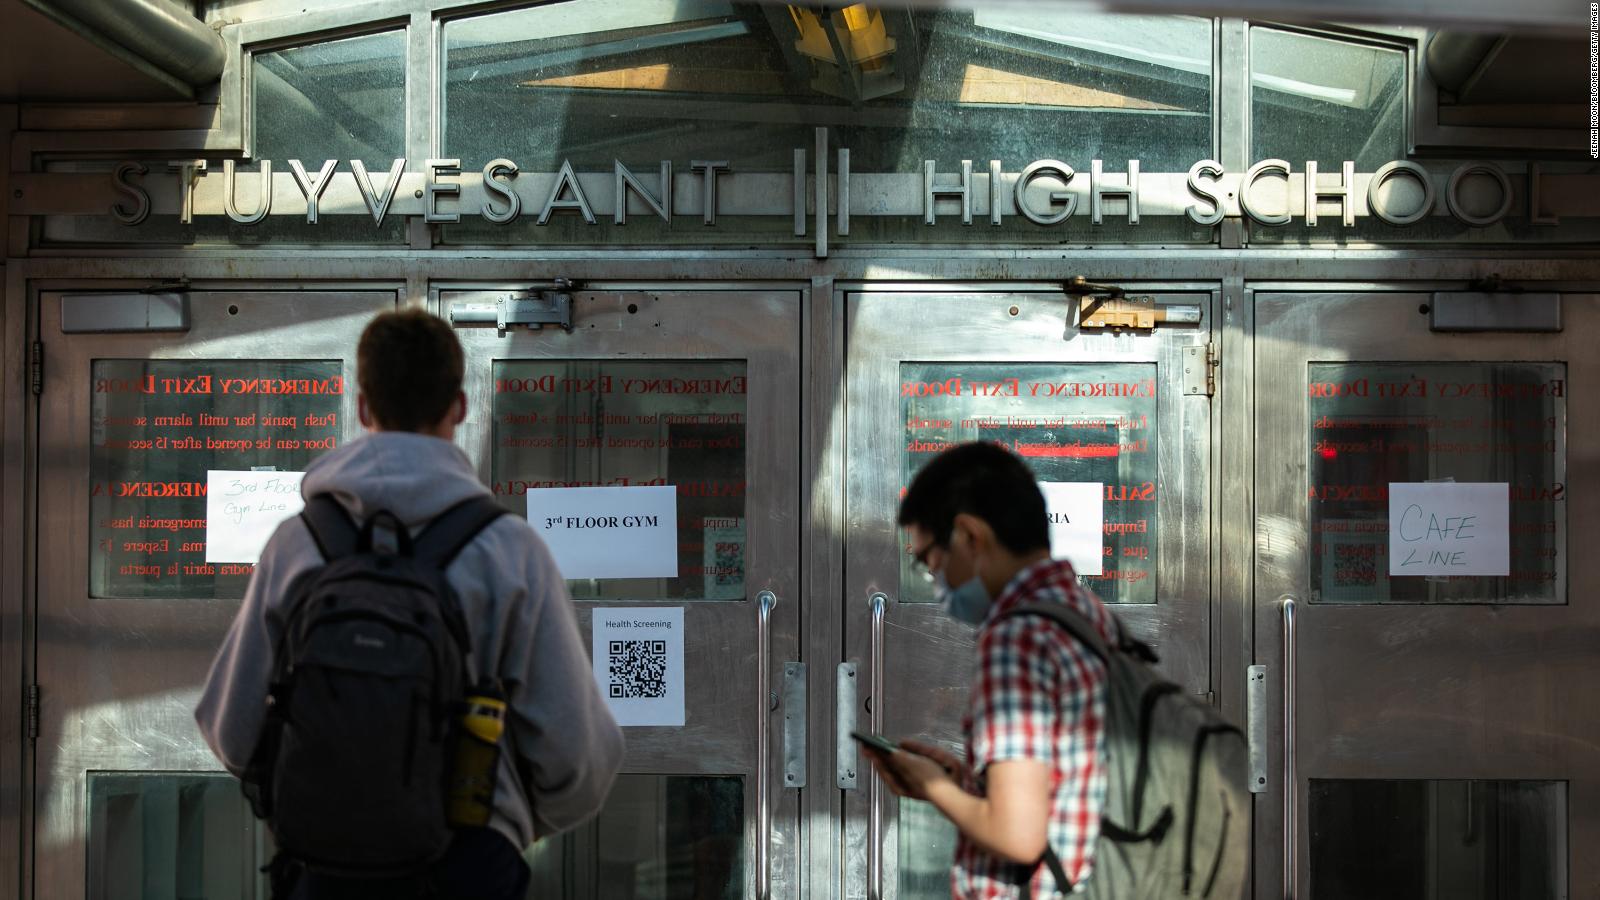 New York City high schools to reopen for inperson learning on March 22